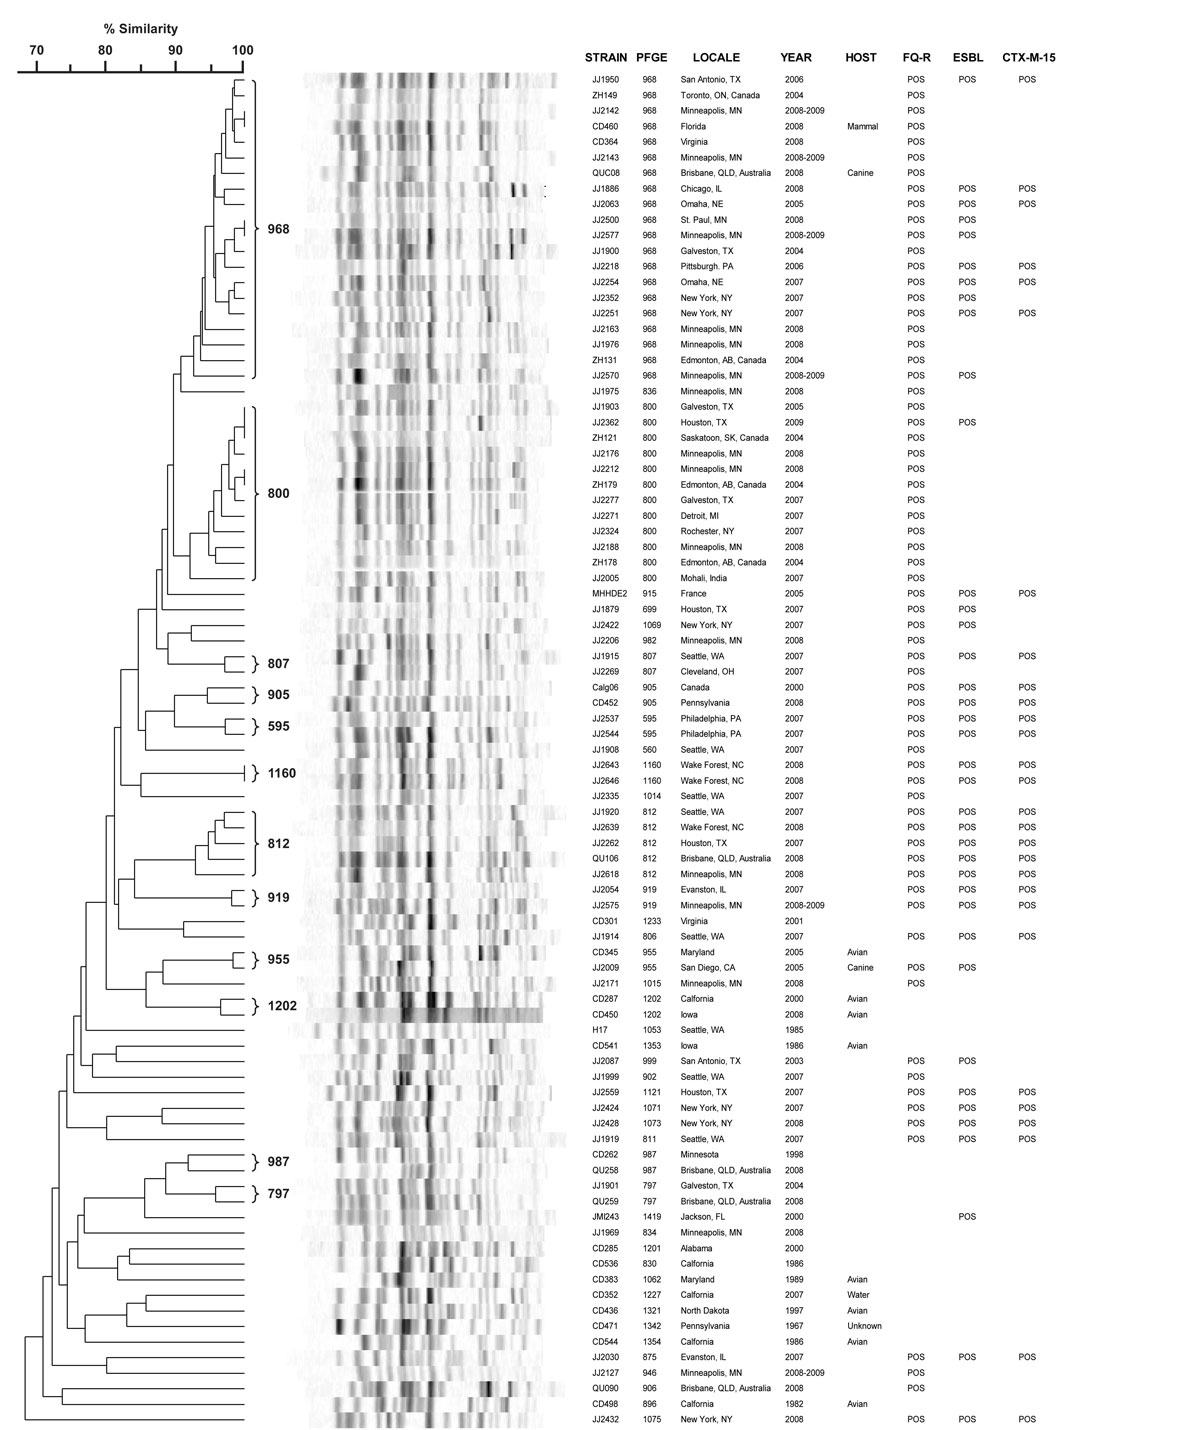 Pulsed-field gel electrophoresis profile dendrogram of 87 diverse isolates of Escherichia coli ST131. Isolates for the dendrogram, which represent a 15% subsample of the total population (n = 579), were selected randomly after deliberate inclusion of 2 representatives of each pulsotype with &gt;6 members (indicated by brackets) plus the earliest previously reported isolate (from 1985) and the earliest present isolate (from 1967). YEAR, year of isolation or submission to reference laboratory; FQ-